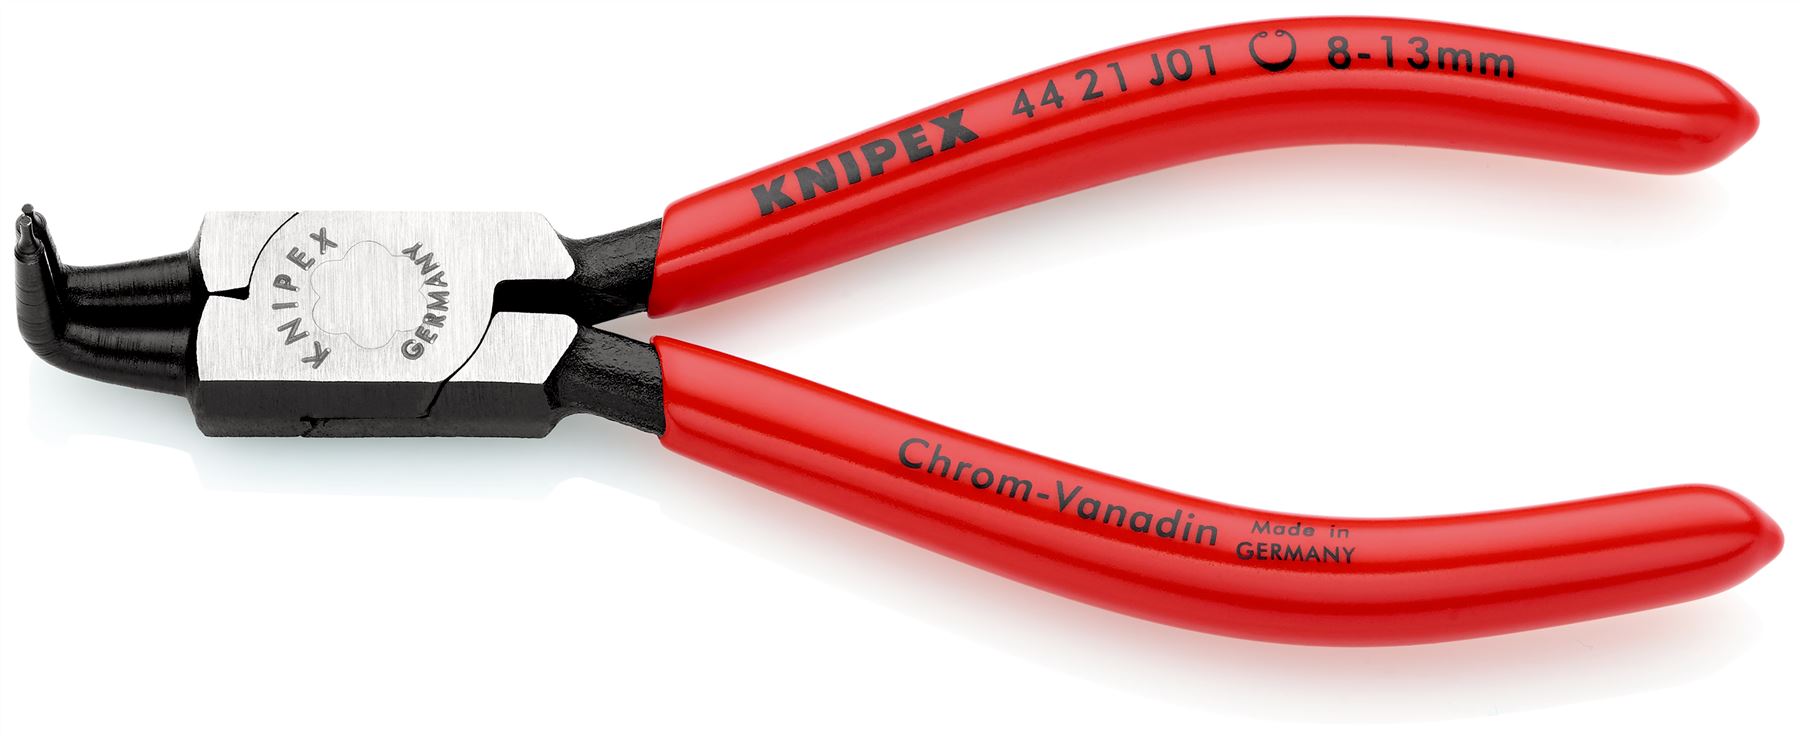 KNIPEX Circlip Pliers for Internal Circlips in Bore Holes Bent Nose 130mm 0.9mm Diameter Tips 44 21 J01